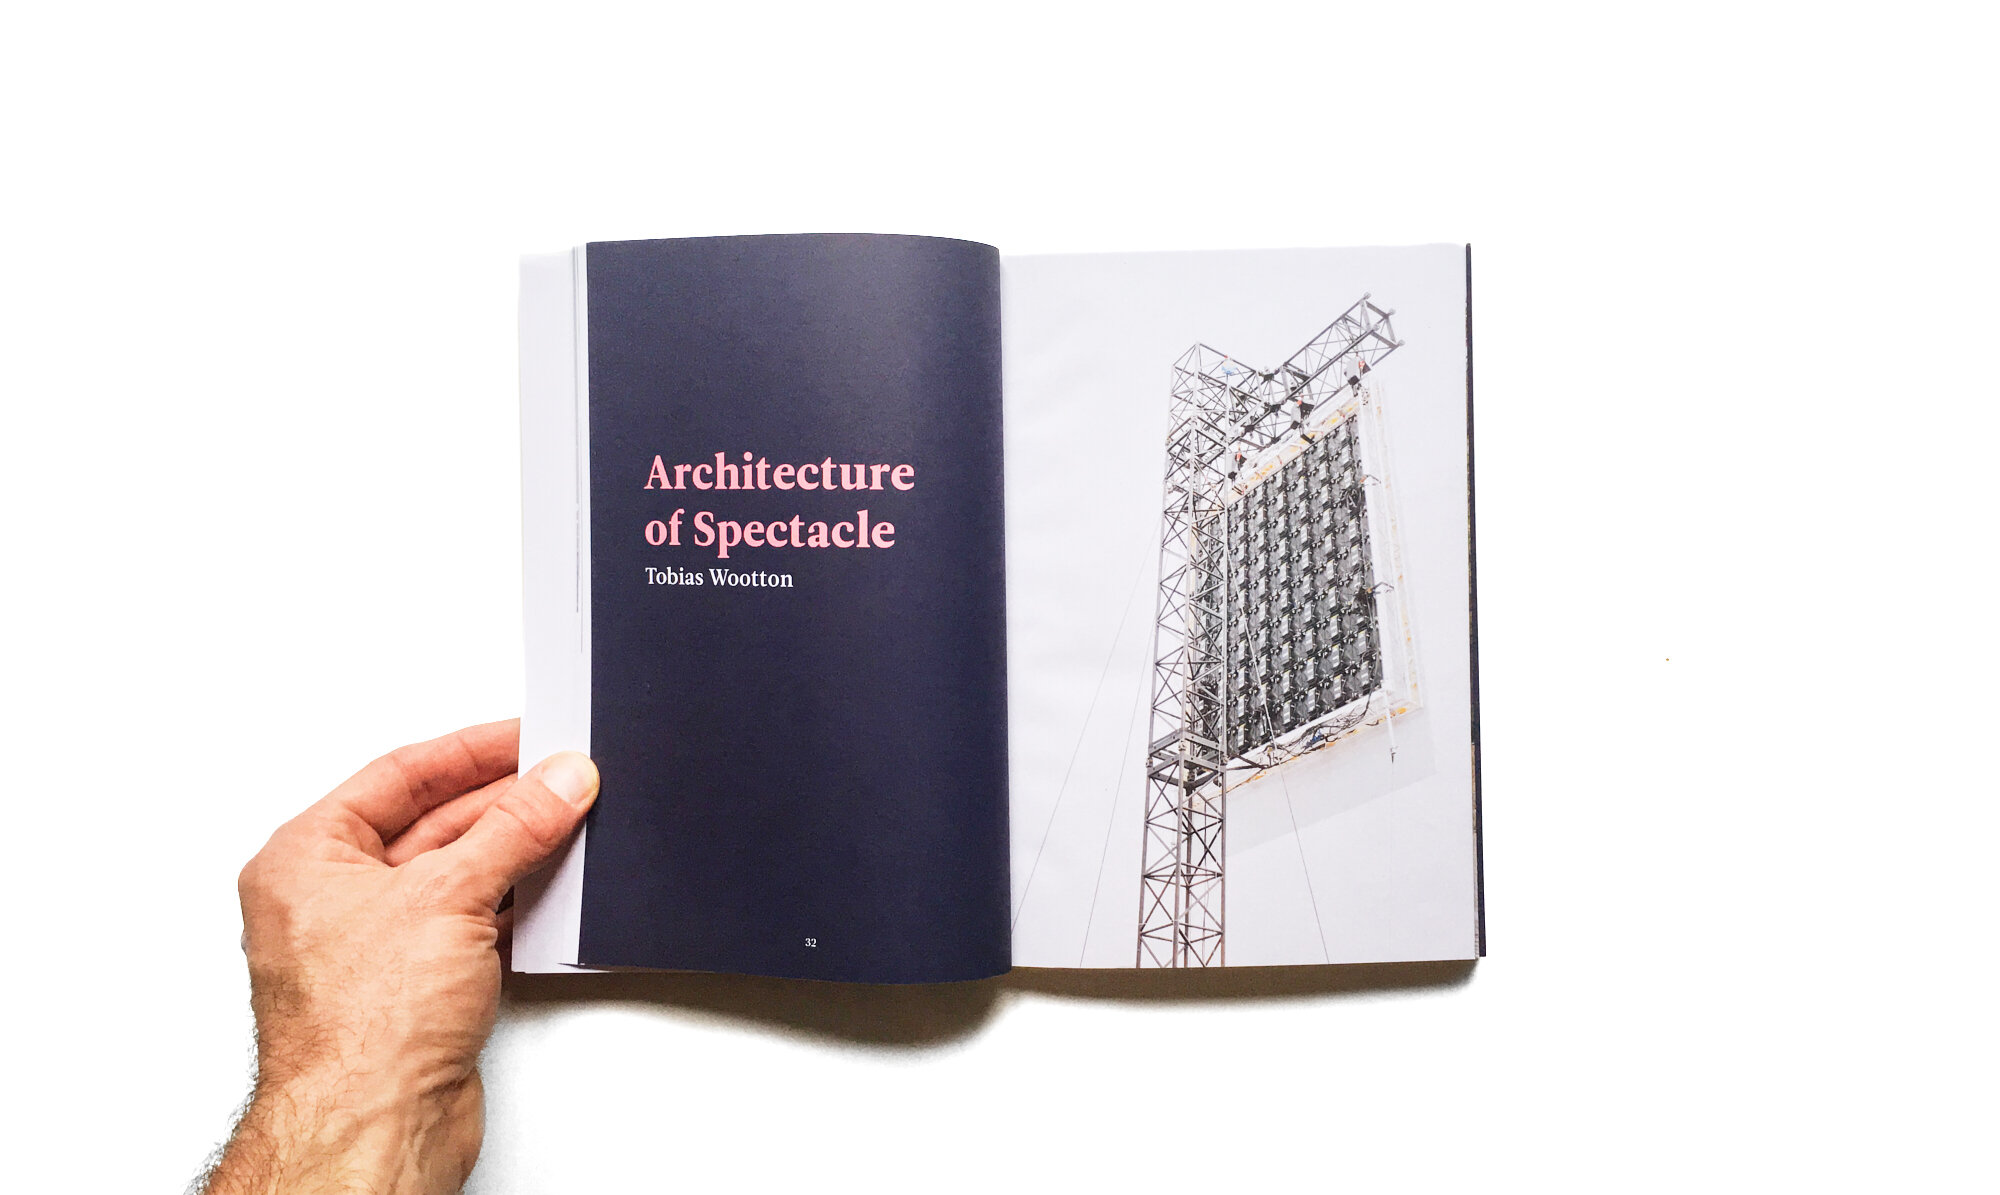  a selection from the Archtiecture of spectacle was featured in King’s Review ‘extremes’ edition 